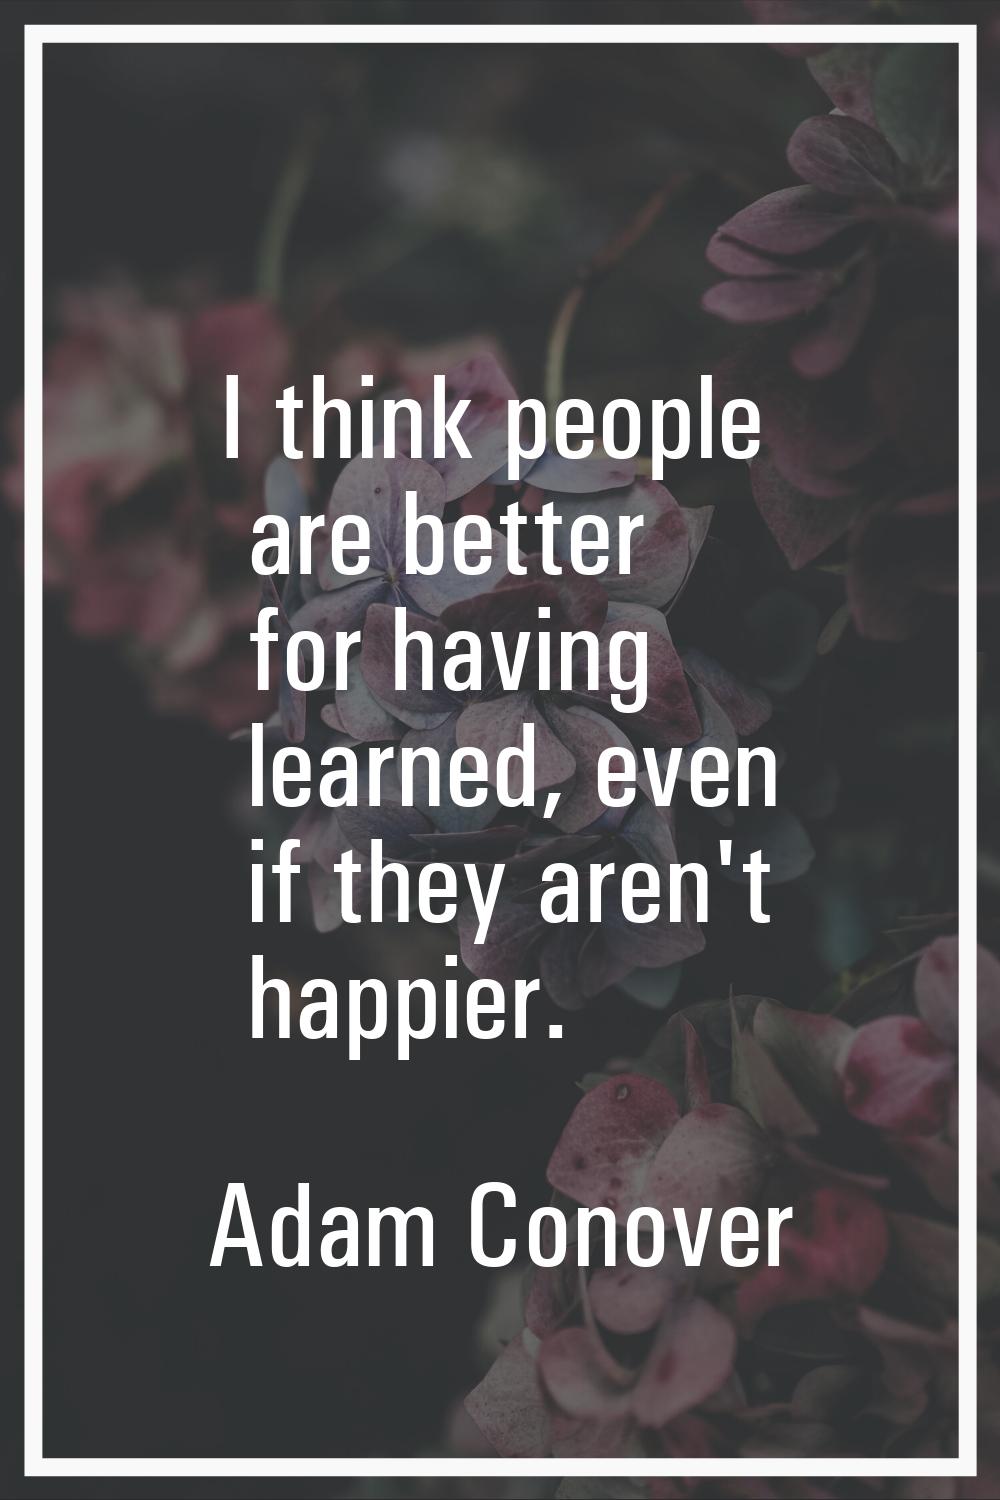 I think people are better for having learned, even if they aren't happier.